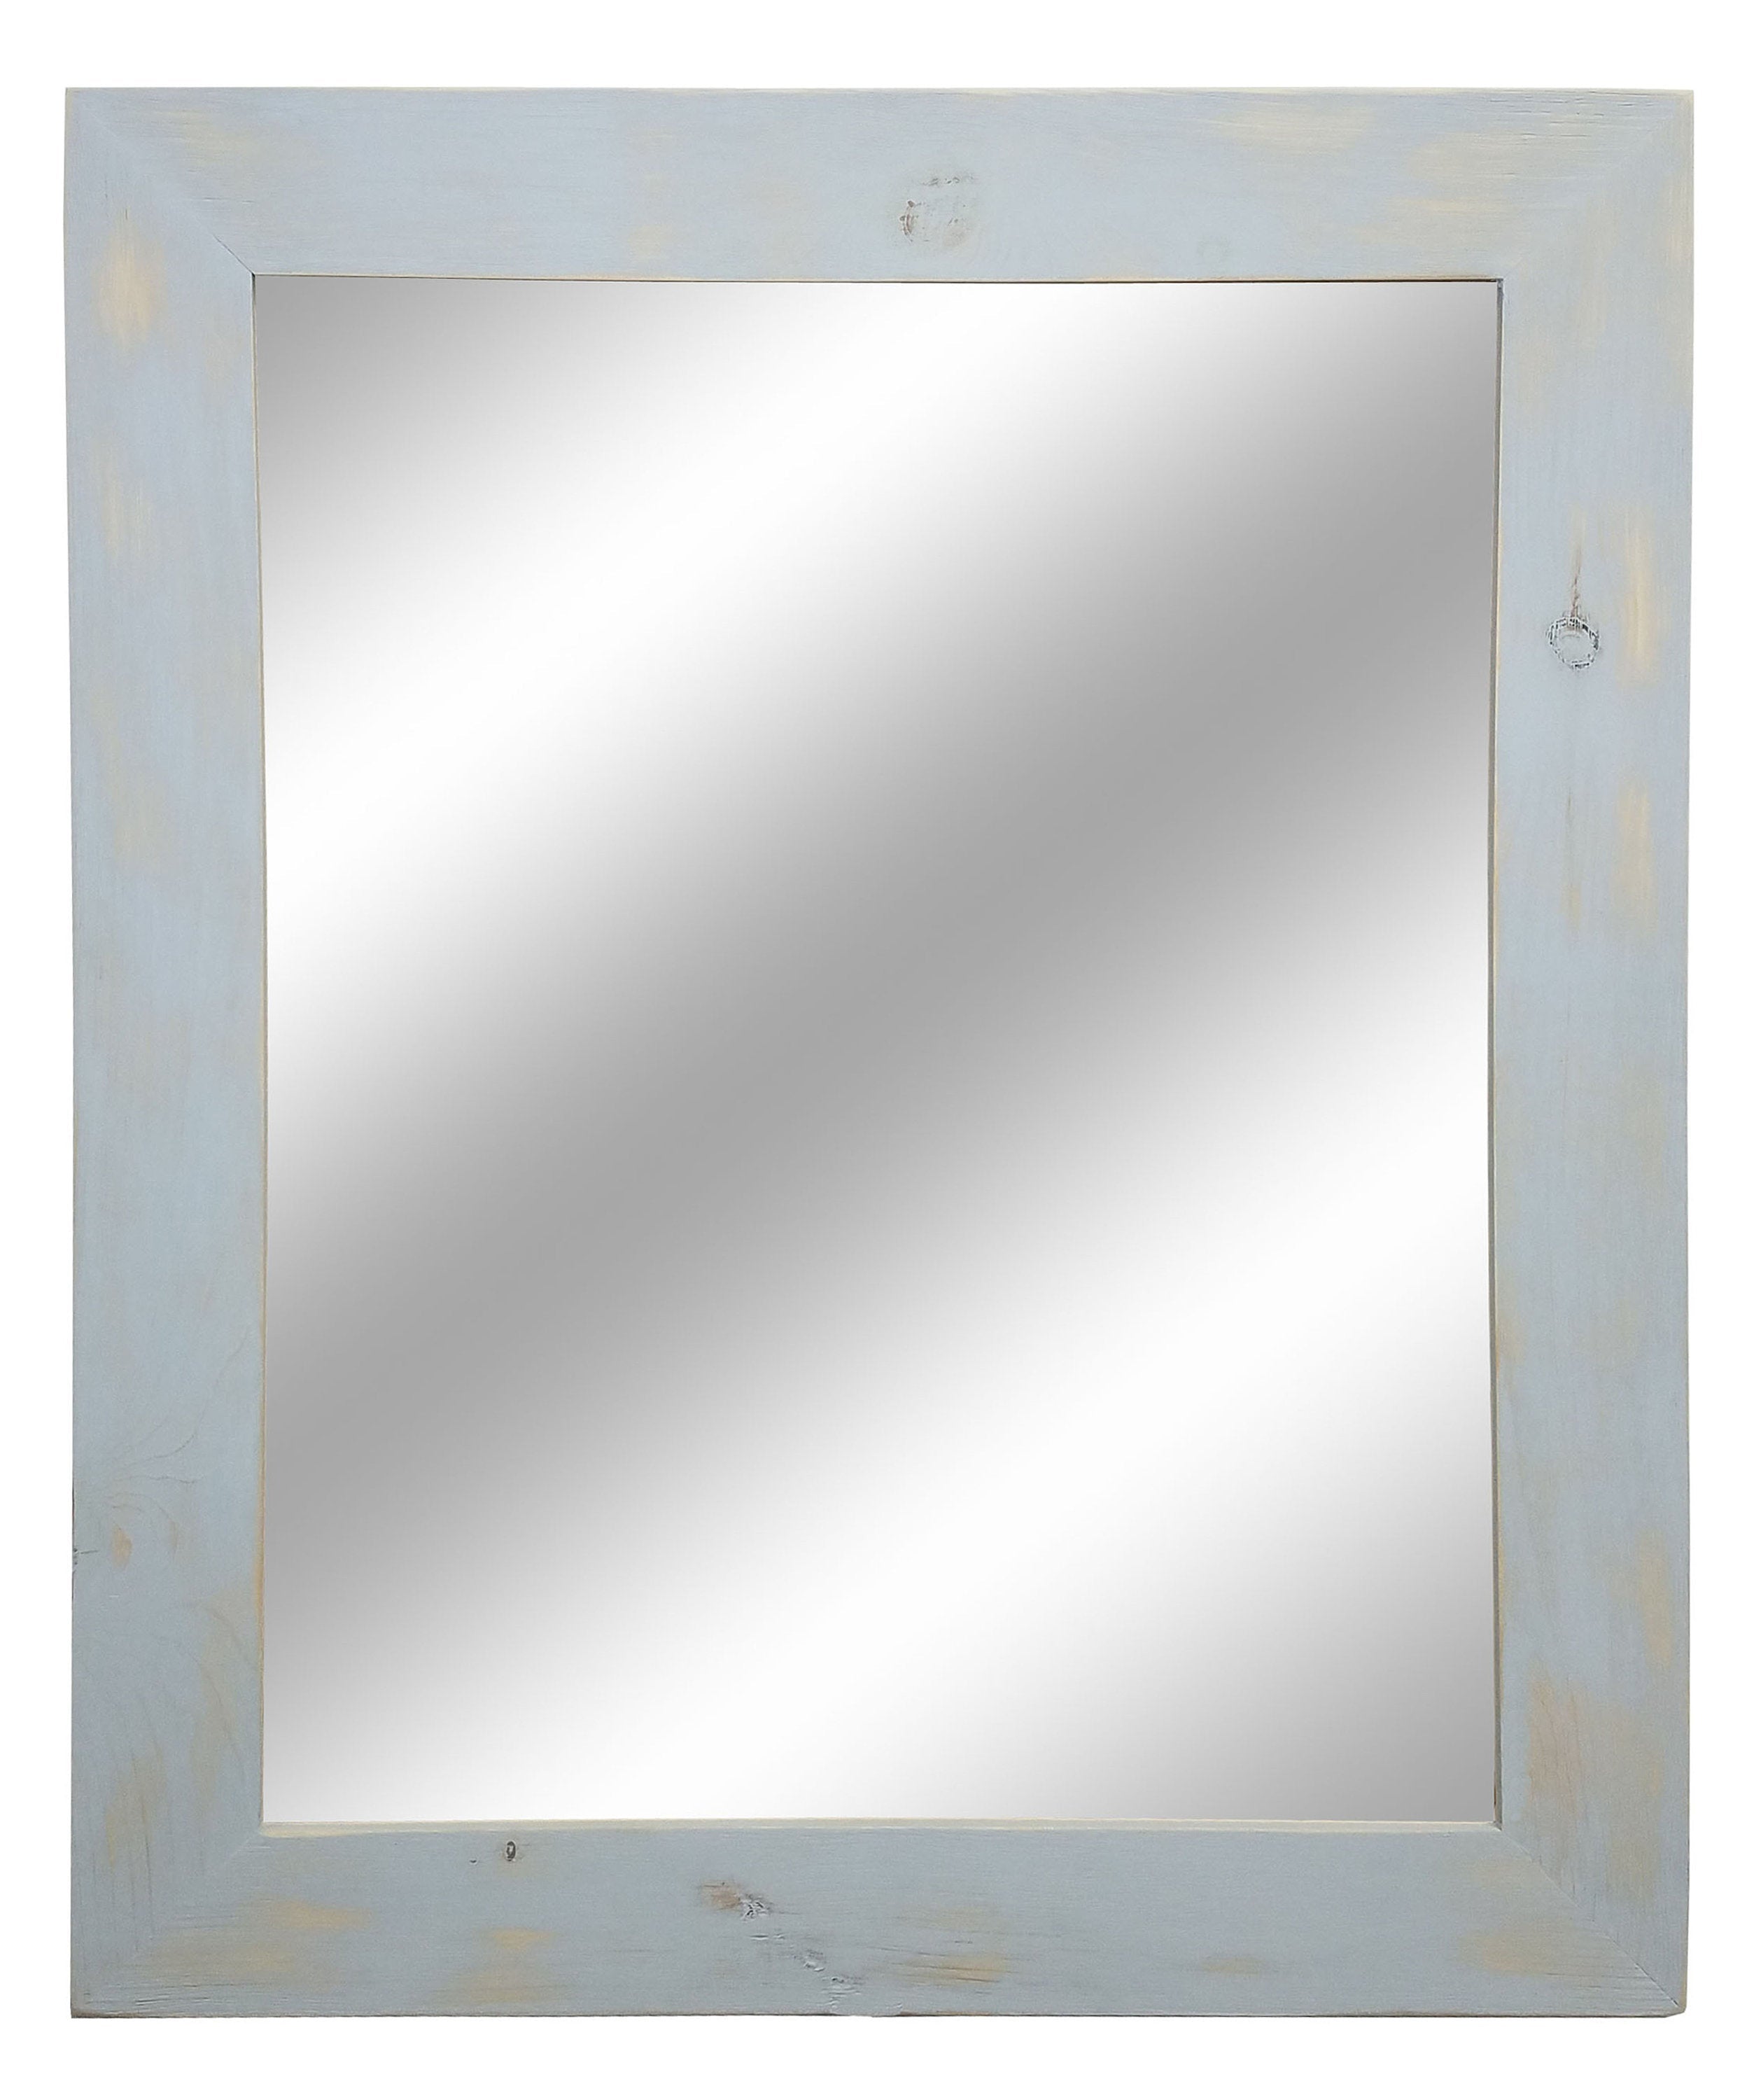 Shiplap Rustic Framed Wall Mirror, 20 Paint Colors, Shown in Light French Gray, Handmade in the USA